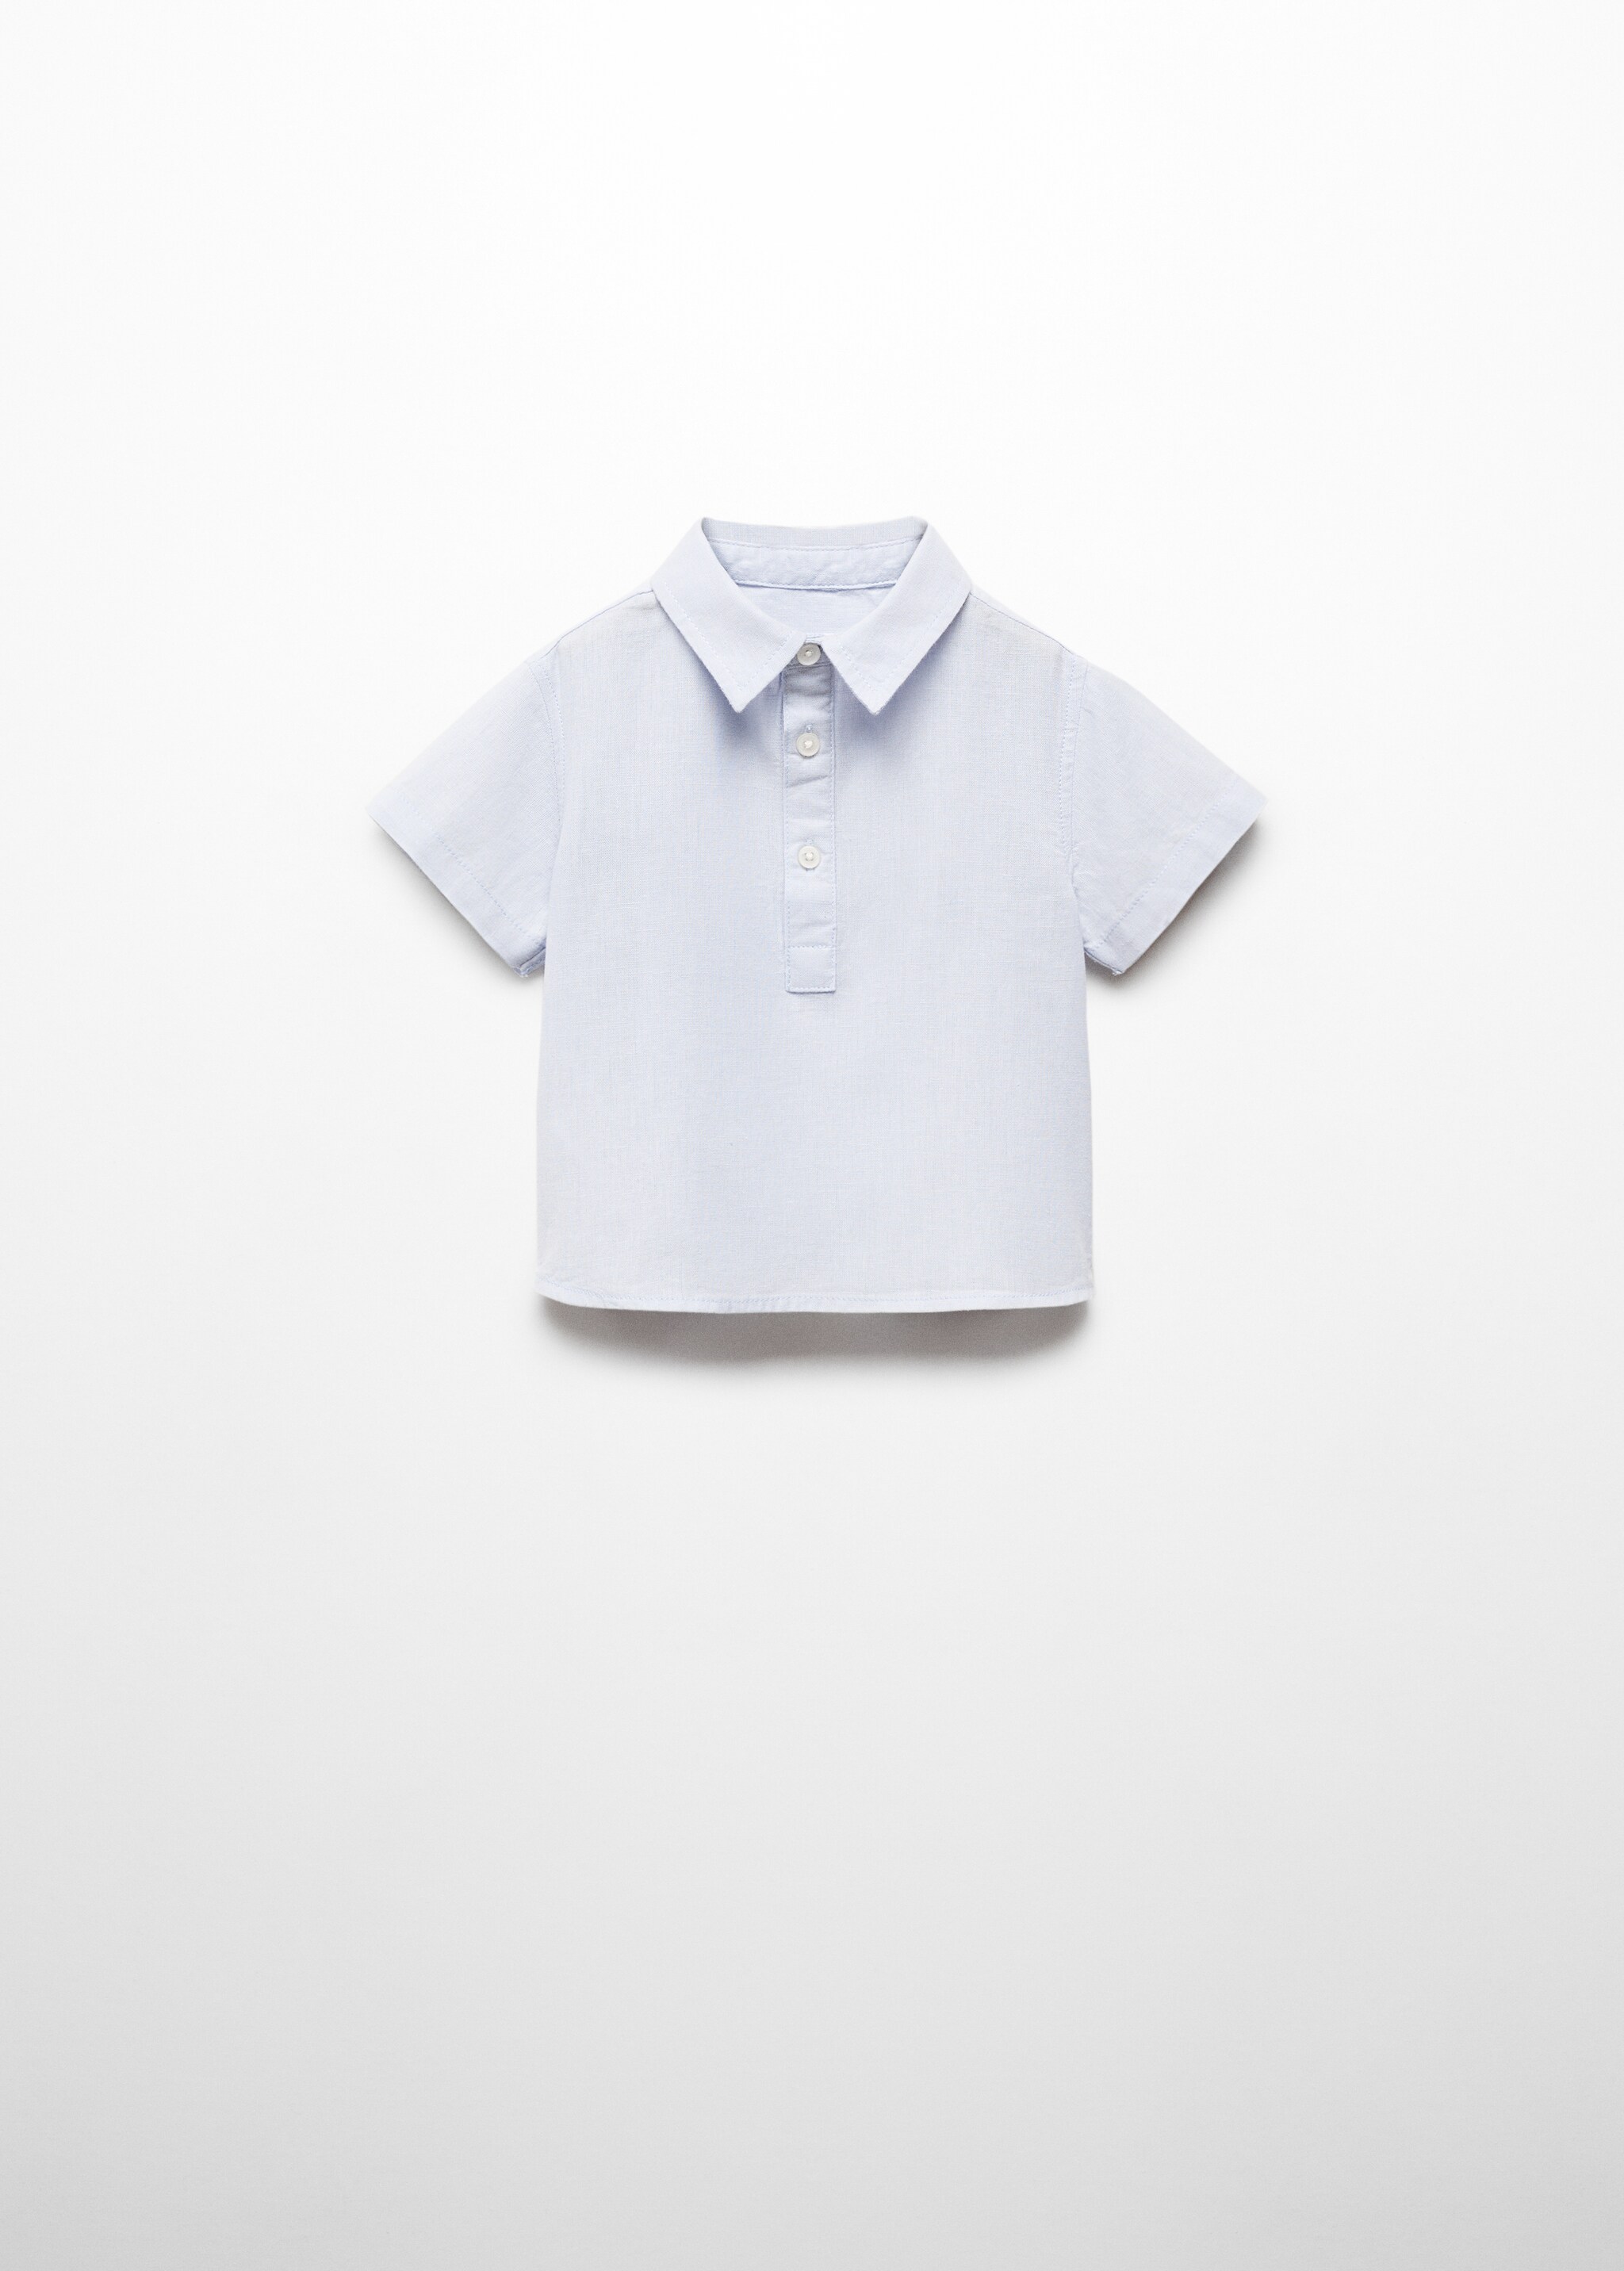 Linen polo shirt - Article without model